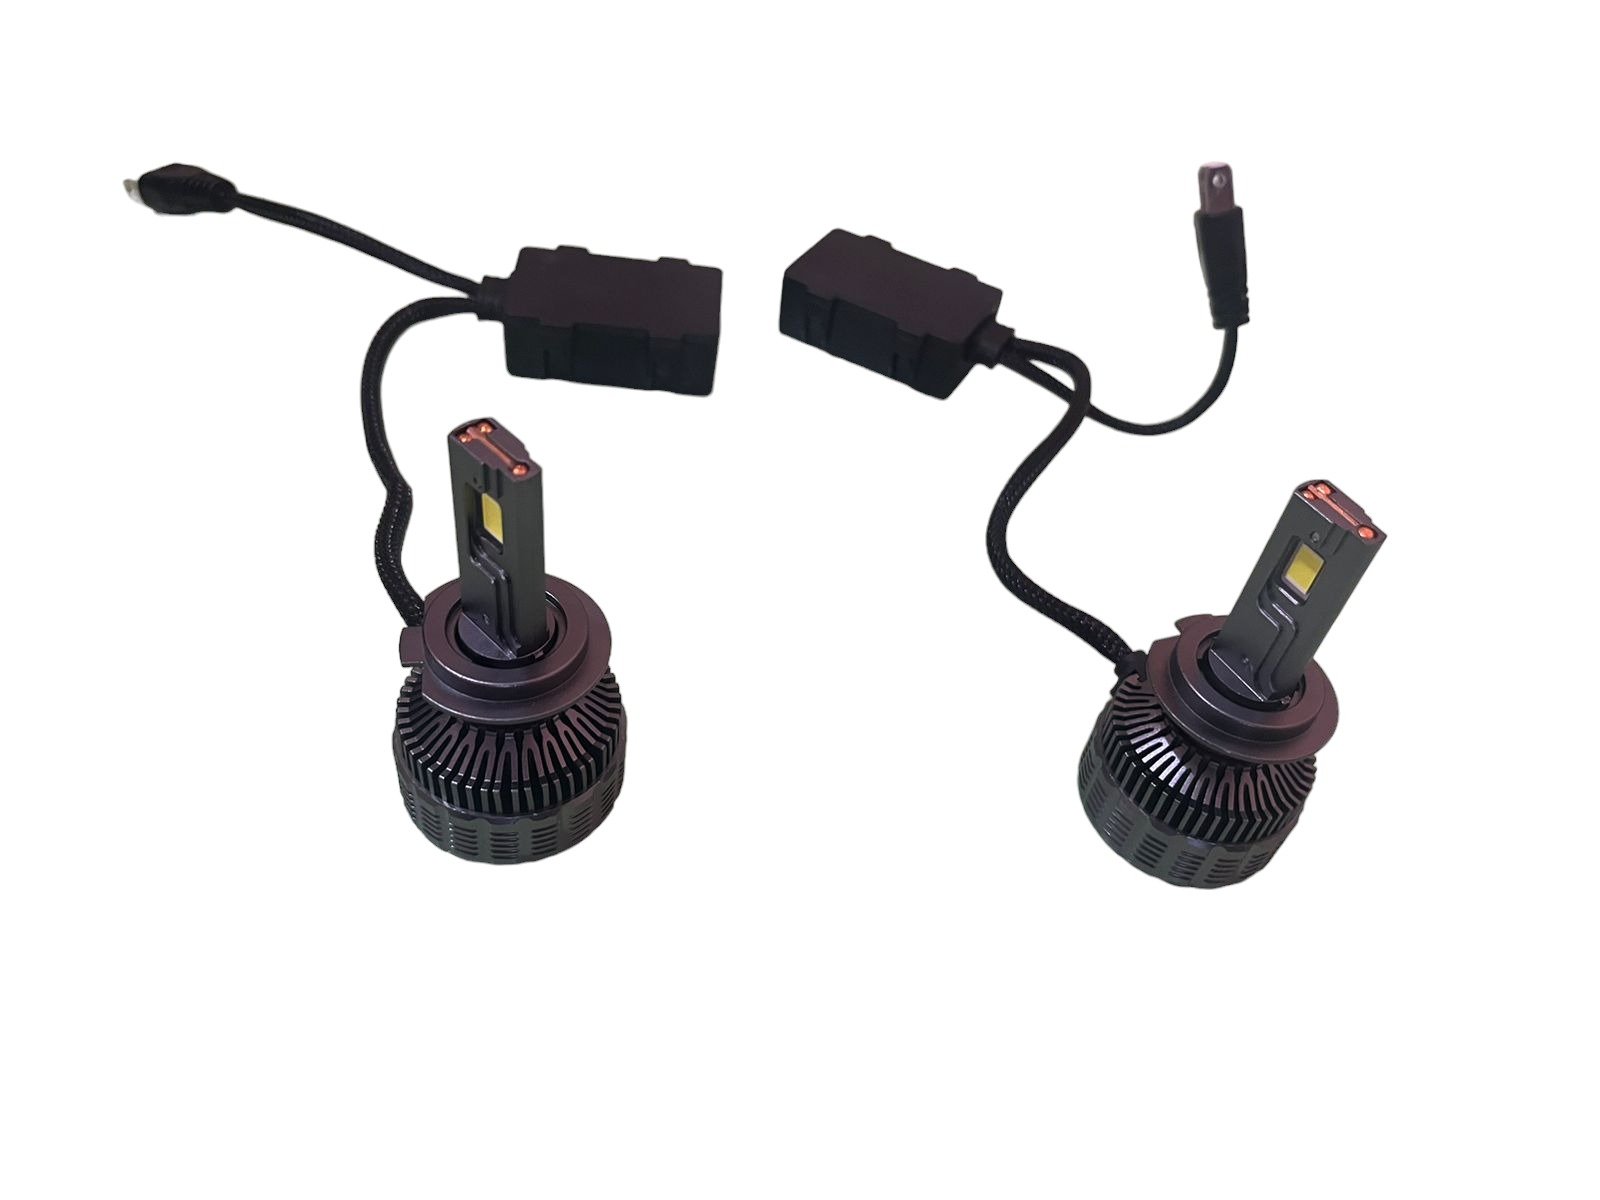 H1 High Quality Super Bright LED For Car 300W/30000LM Pair 6500K With 1Year Warranty (H1) Image 